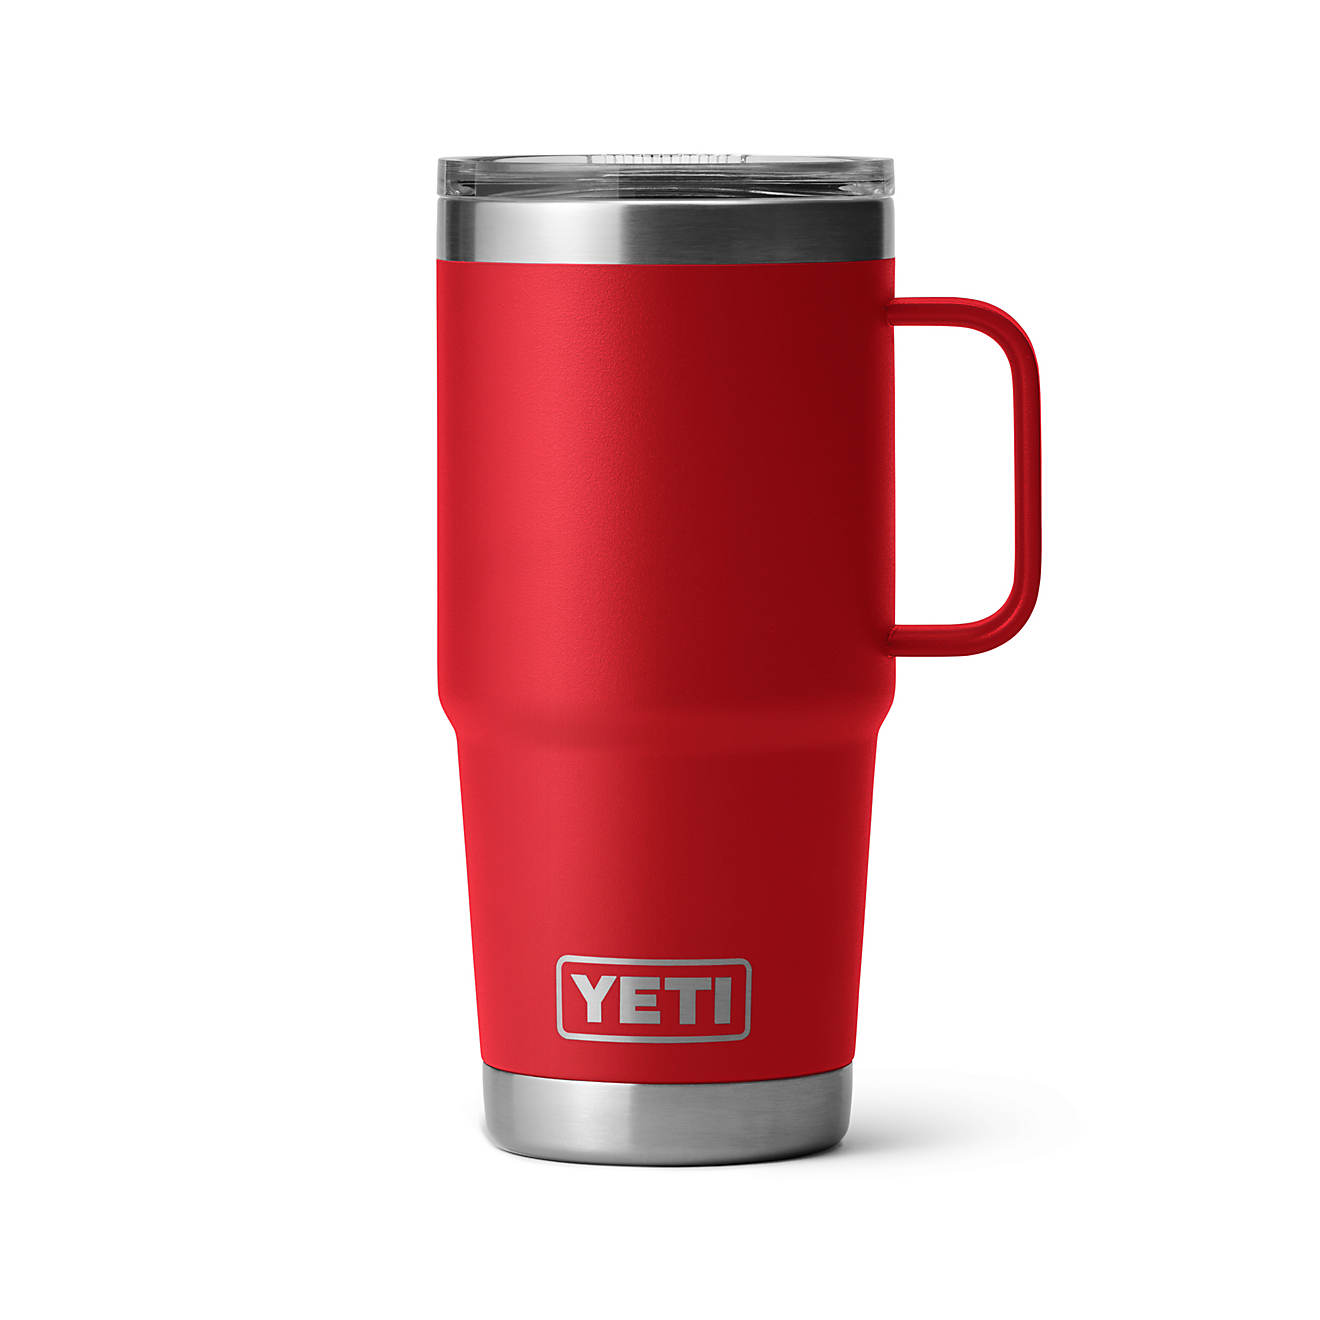 https://academy.scene7.com/is/image/academy//drinkware/yeti-rambler-20-oz-travel-mug-with-stronghold-lid-21071501392-red/fe4a88bbd8904ed5a1541f1afb486a91?$pdp-gallery-ng$